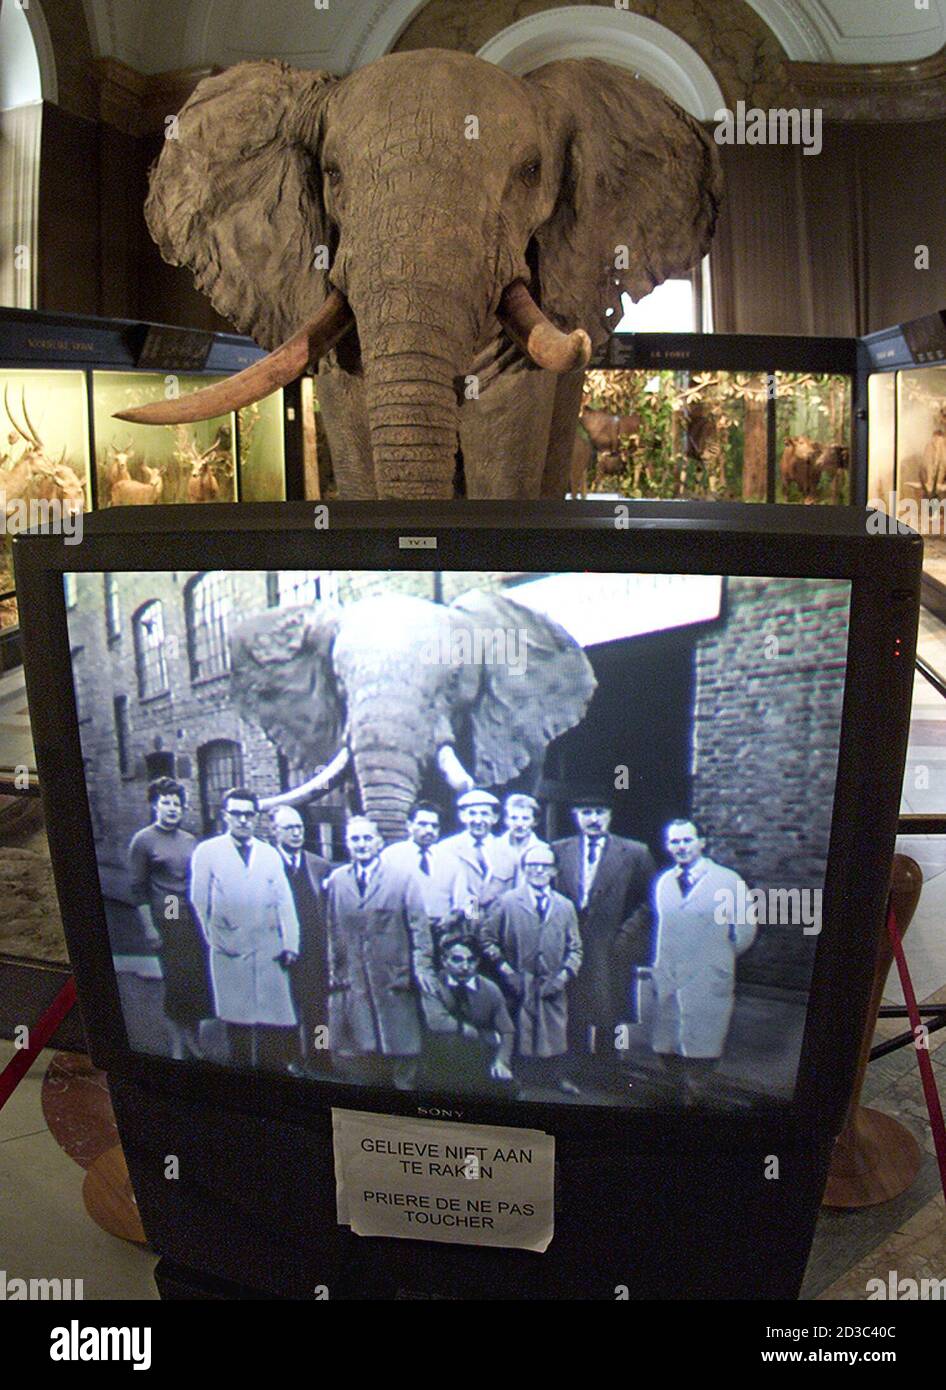 A television screen shows exhibition organizers in front of a stuffed elephant at the Brussels Royal Museum for Central Africa in Tervuren November 16, 2001. Conceived in 1897, by King Leopold II, as a temporary World fair exhibition, its original purpose was to show off the Congo's flora, fauna and natural resources, and illustrate how these benefited Belgium's economy. REUTERS/Yves Herman TO ACCOMPANY FEATURE STORY BELGIUM-CONGO-MUSEUM REUTERS  HRM/ Stock Photo